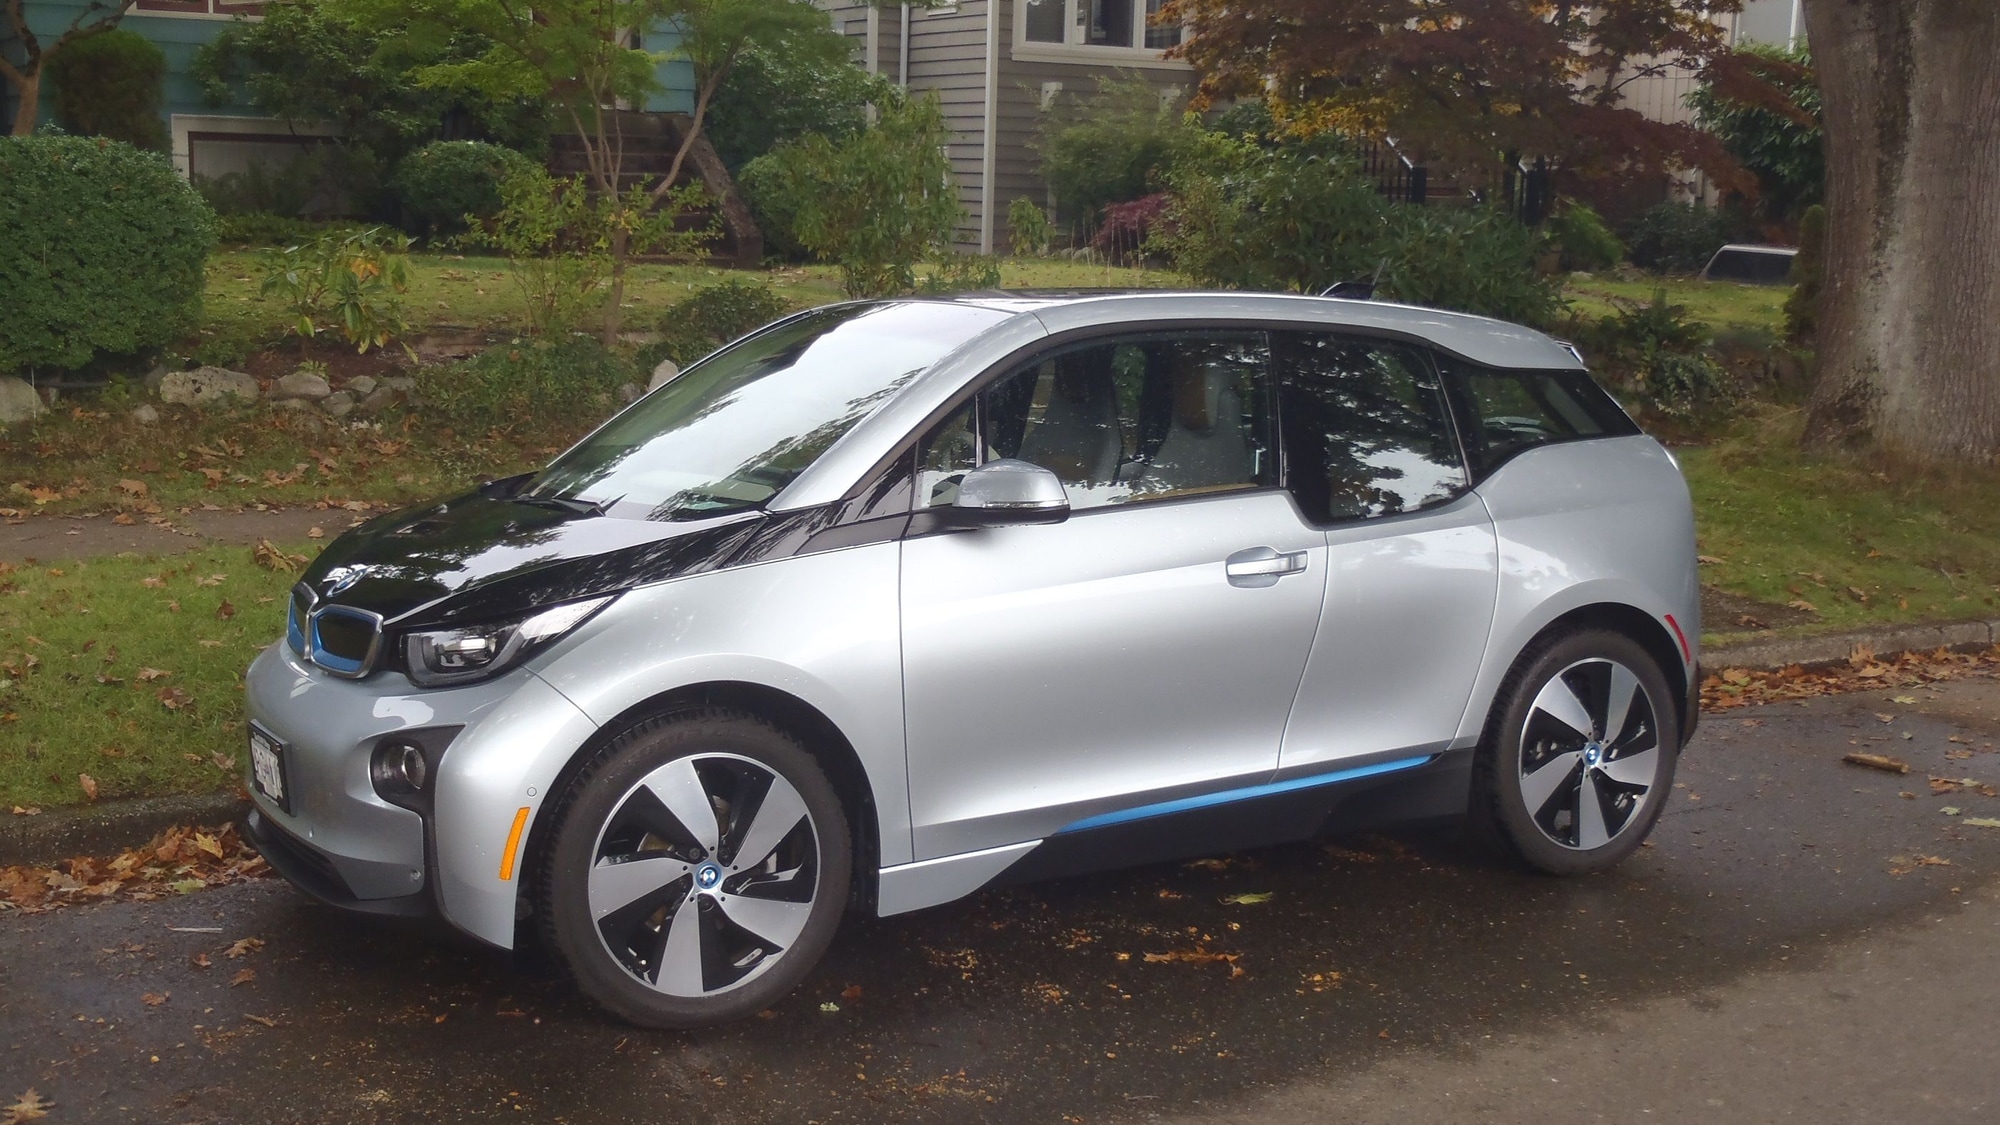 2014 BMW i3 in Vancouver, Canada   [photo: Don Chandler]